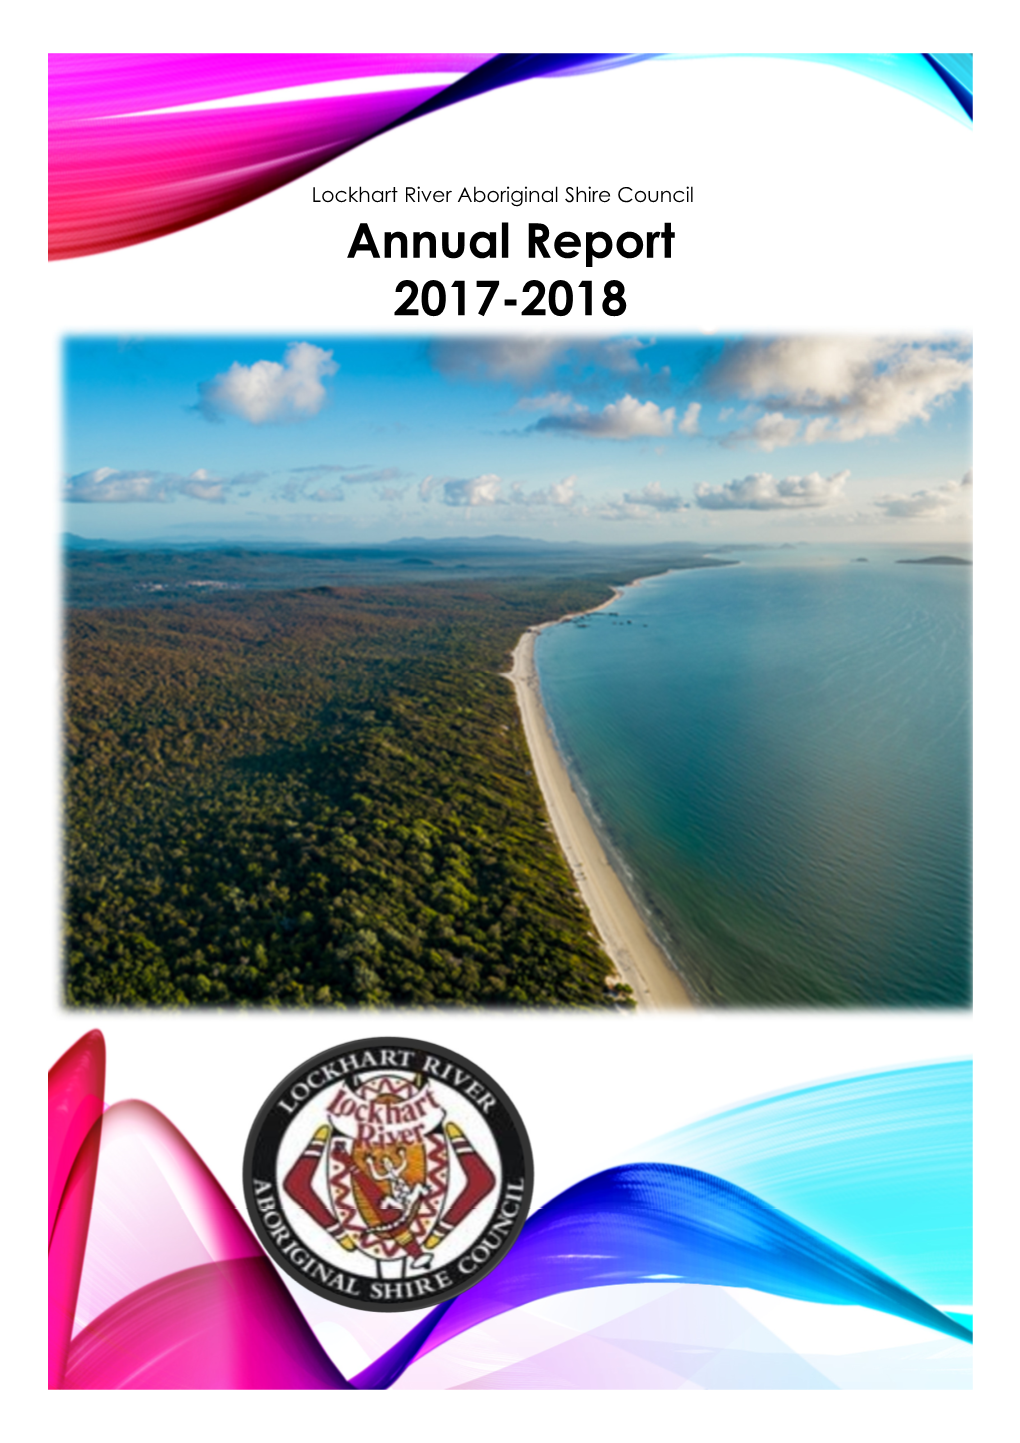 Annual Report 2017-2018 ABOUT THIS REPORT This Is Another Prosperous Year for Lockhart River Aboriginal Shire Council